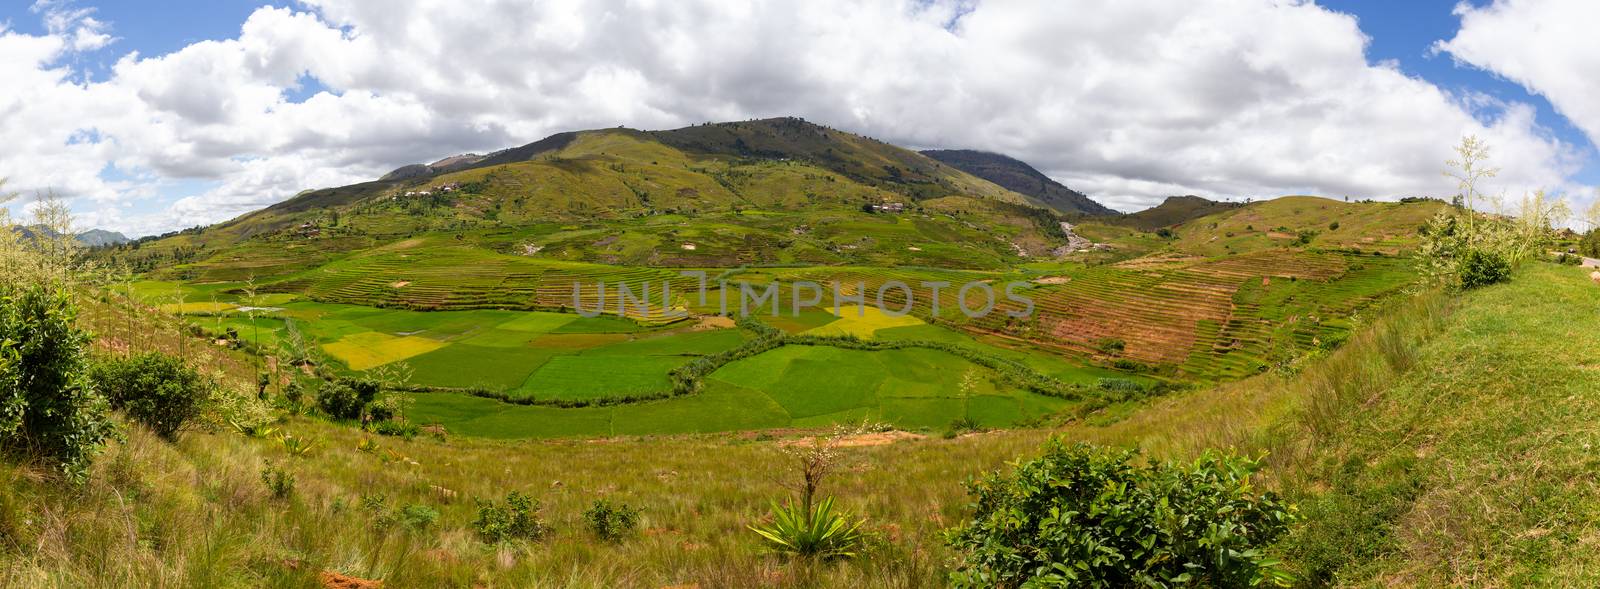 Landscape shot as a panoramic image of the beauty of Madagascar